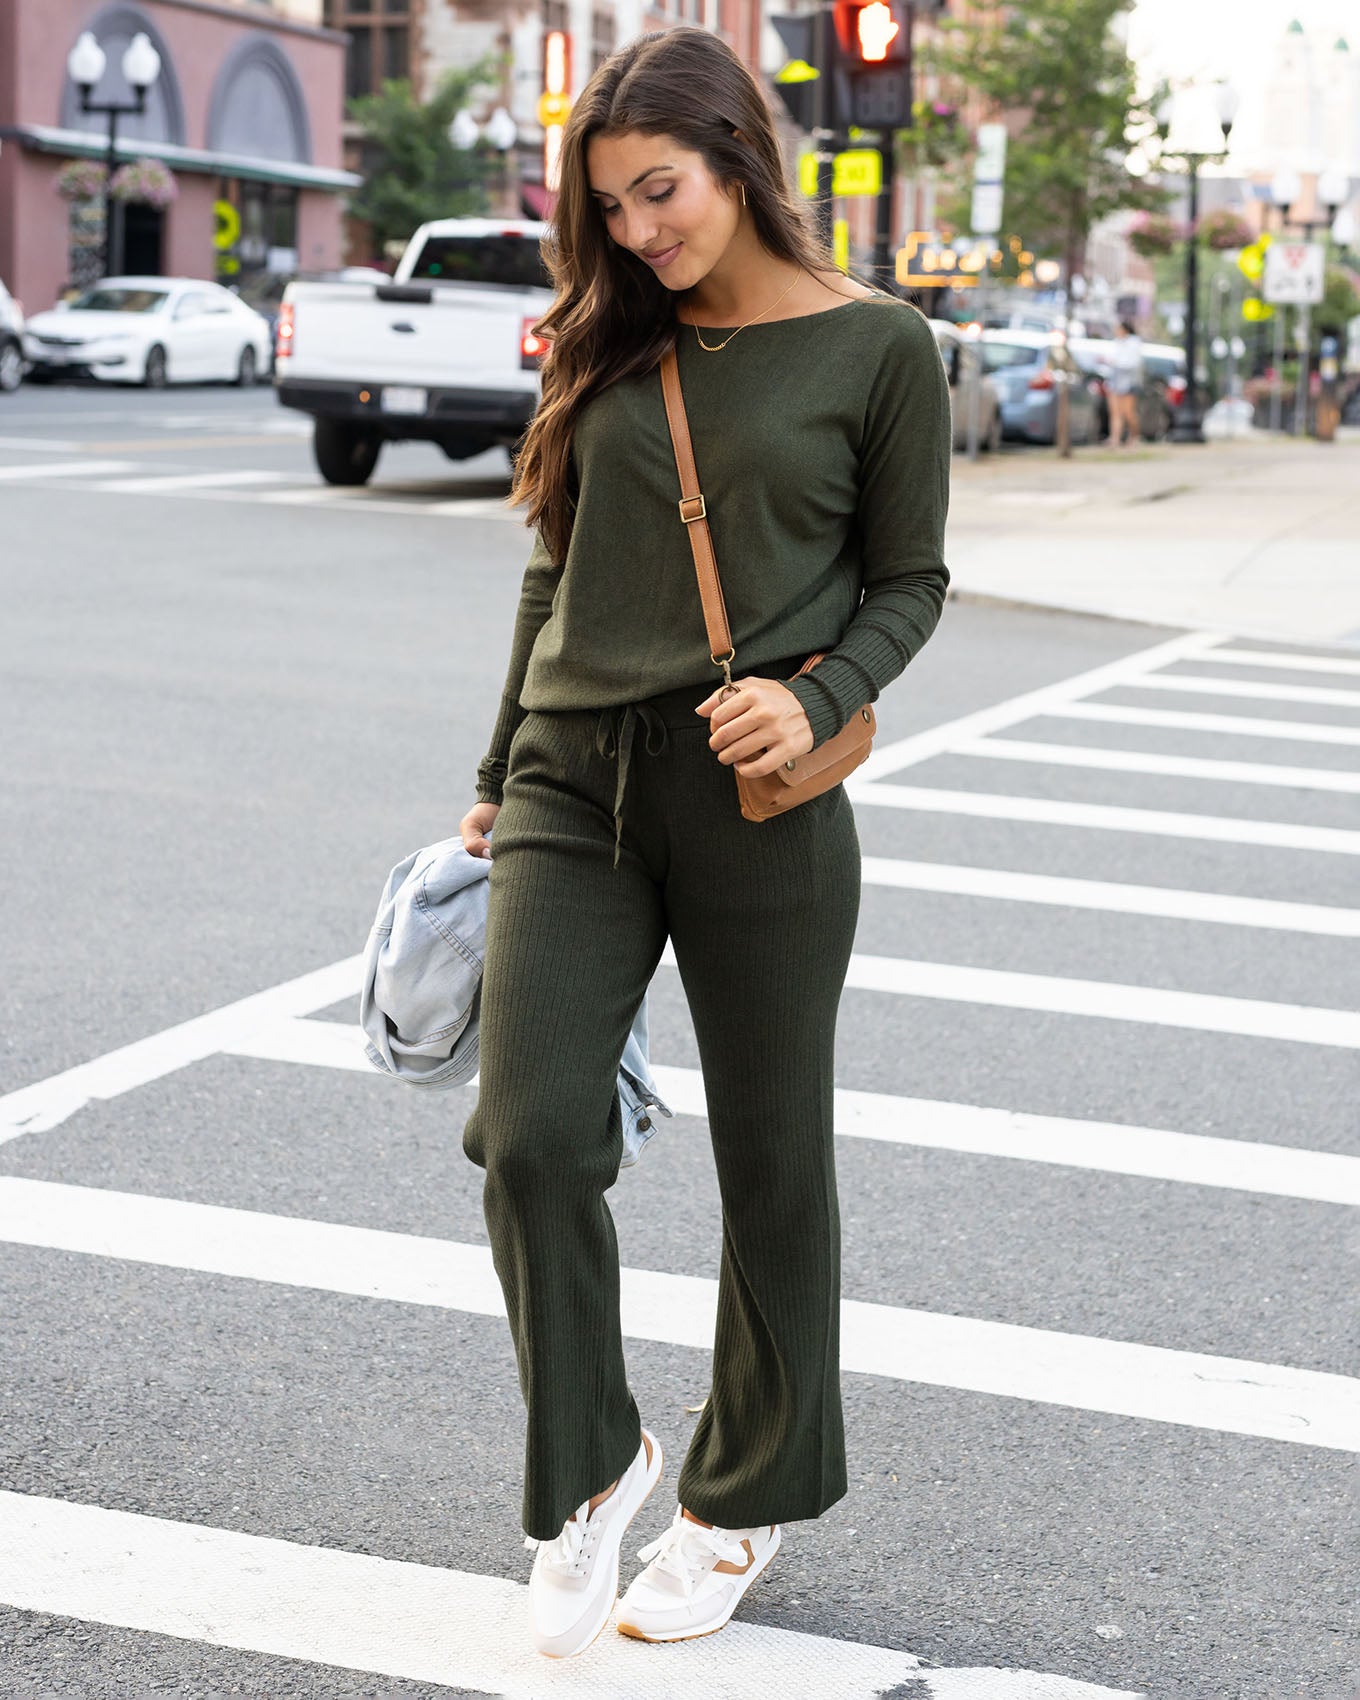 Classic & Cozy Winter Moss Ribbed Sweater Pants - Grace and Lace